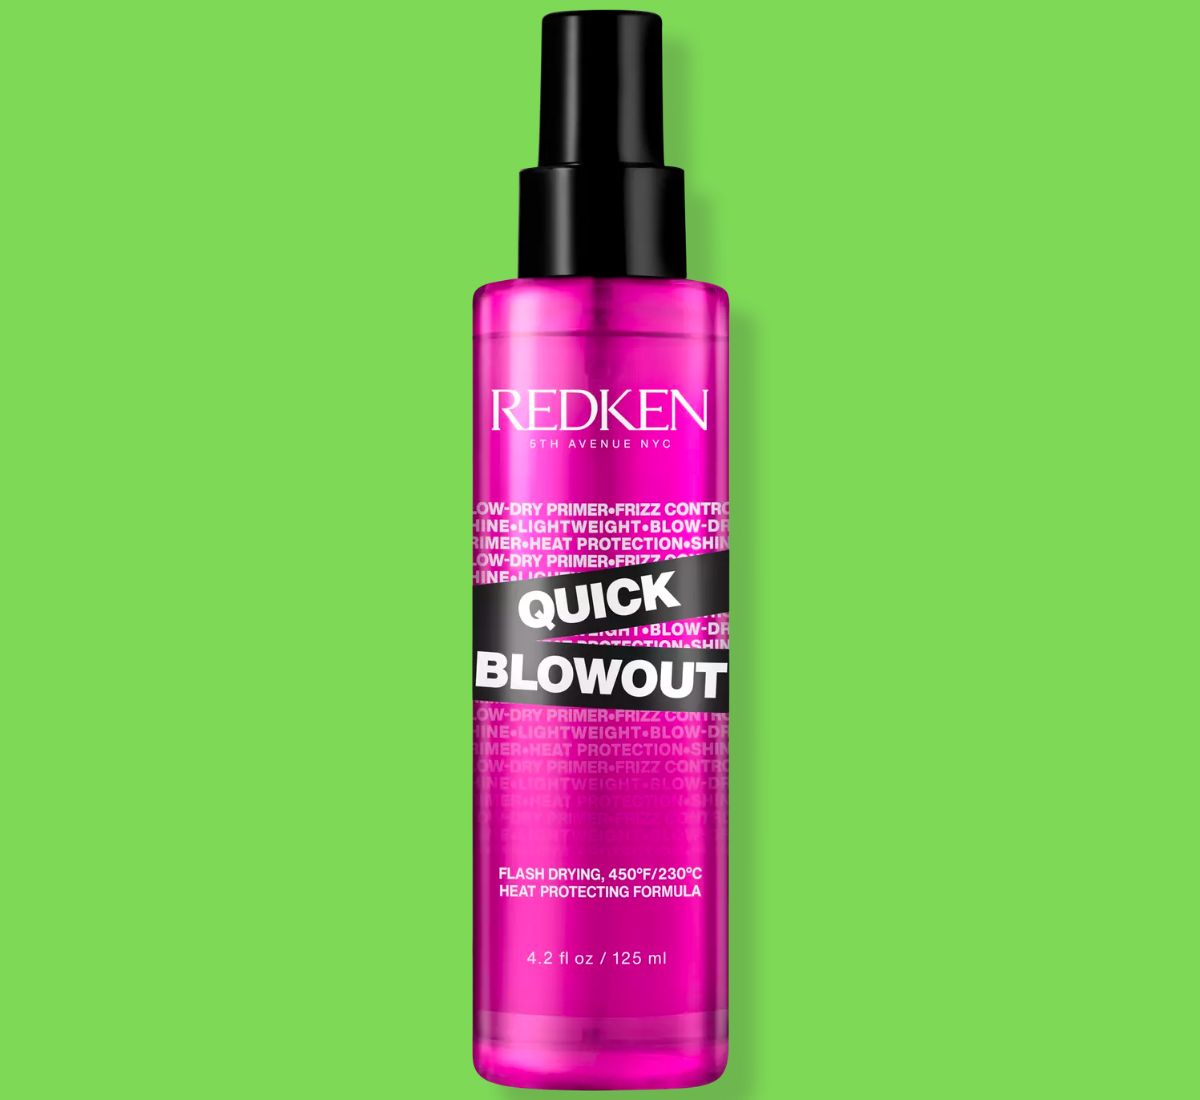 Redken Quick Blowout Heat Protectant Spray stock image